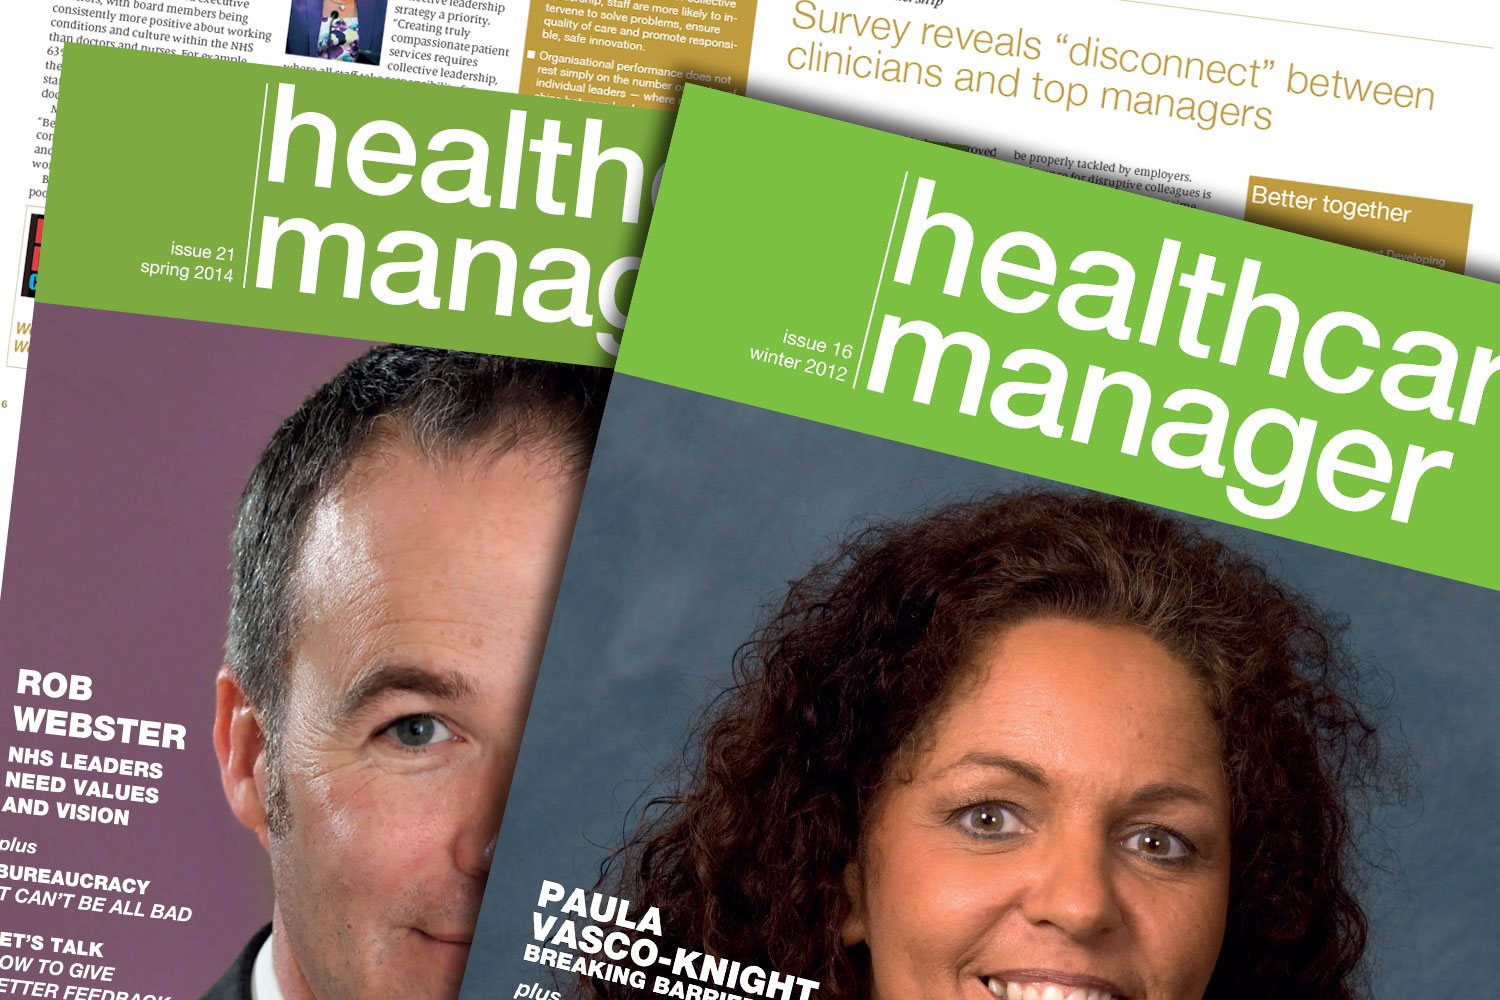 Healthcare Manager magazine